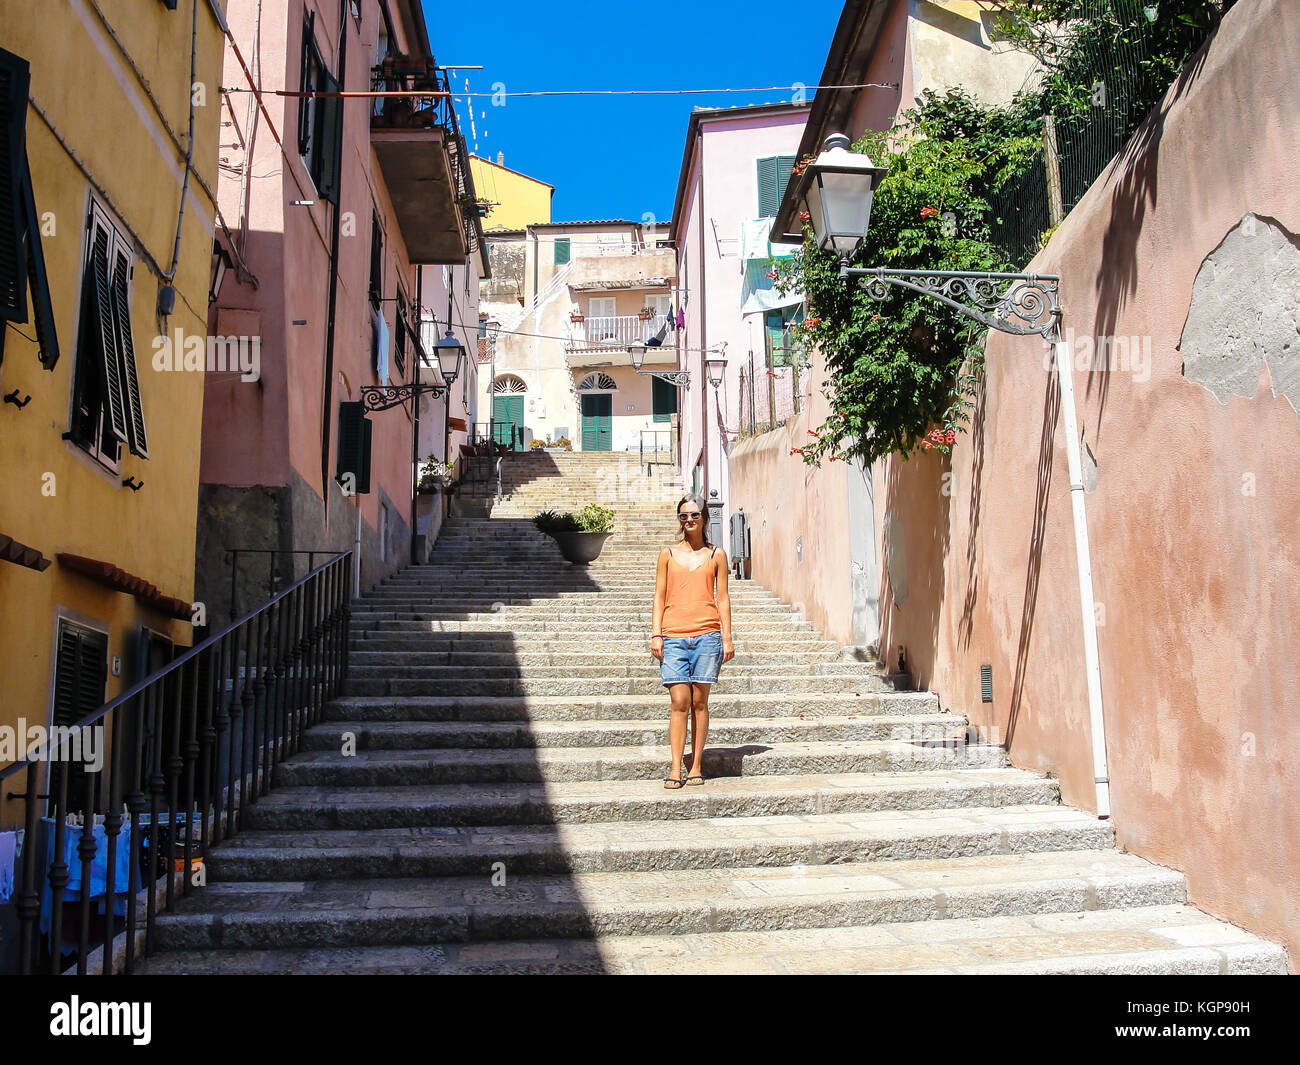 Young woman with sunglasses dressed in casual summer clothes walking down an alley in a small rural medieval village in Italy Stock Photo